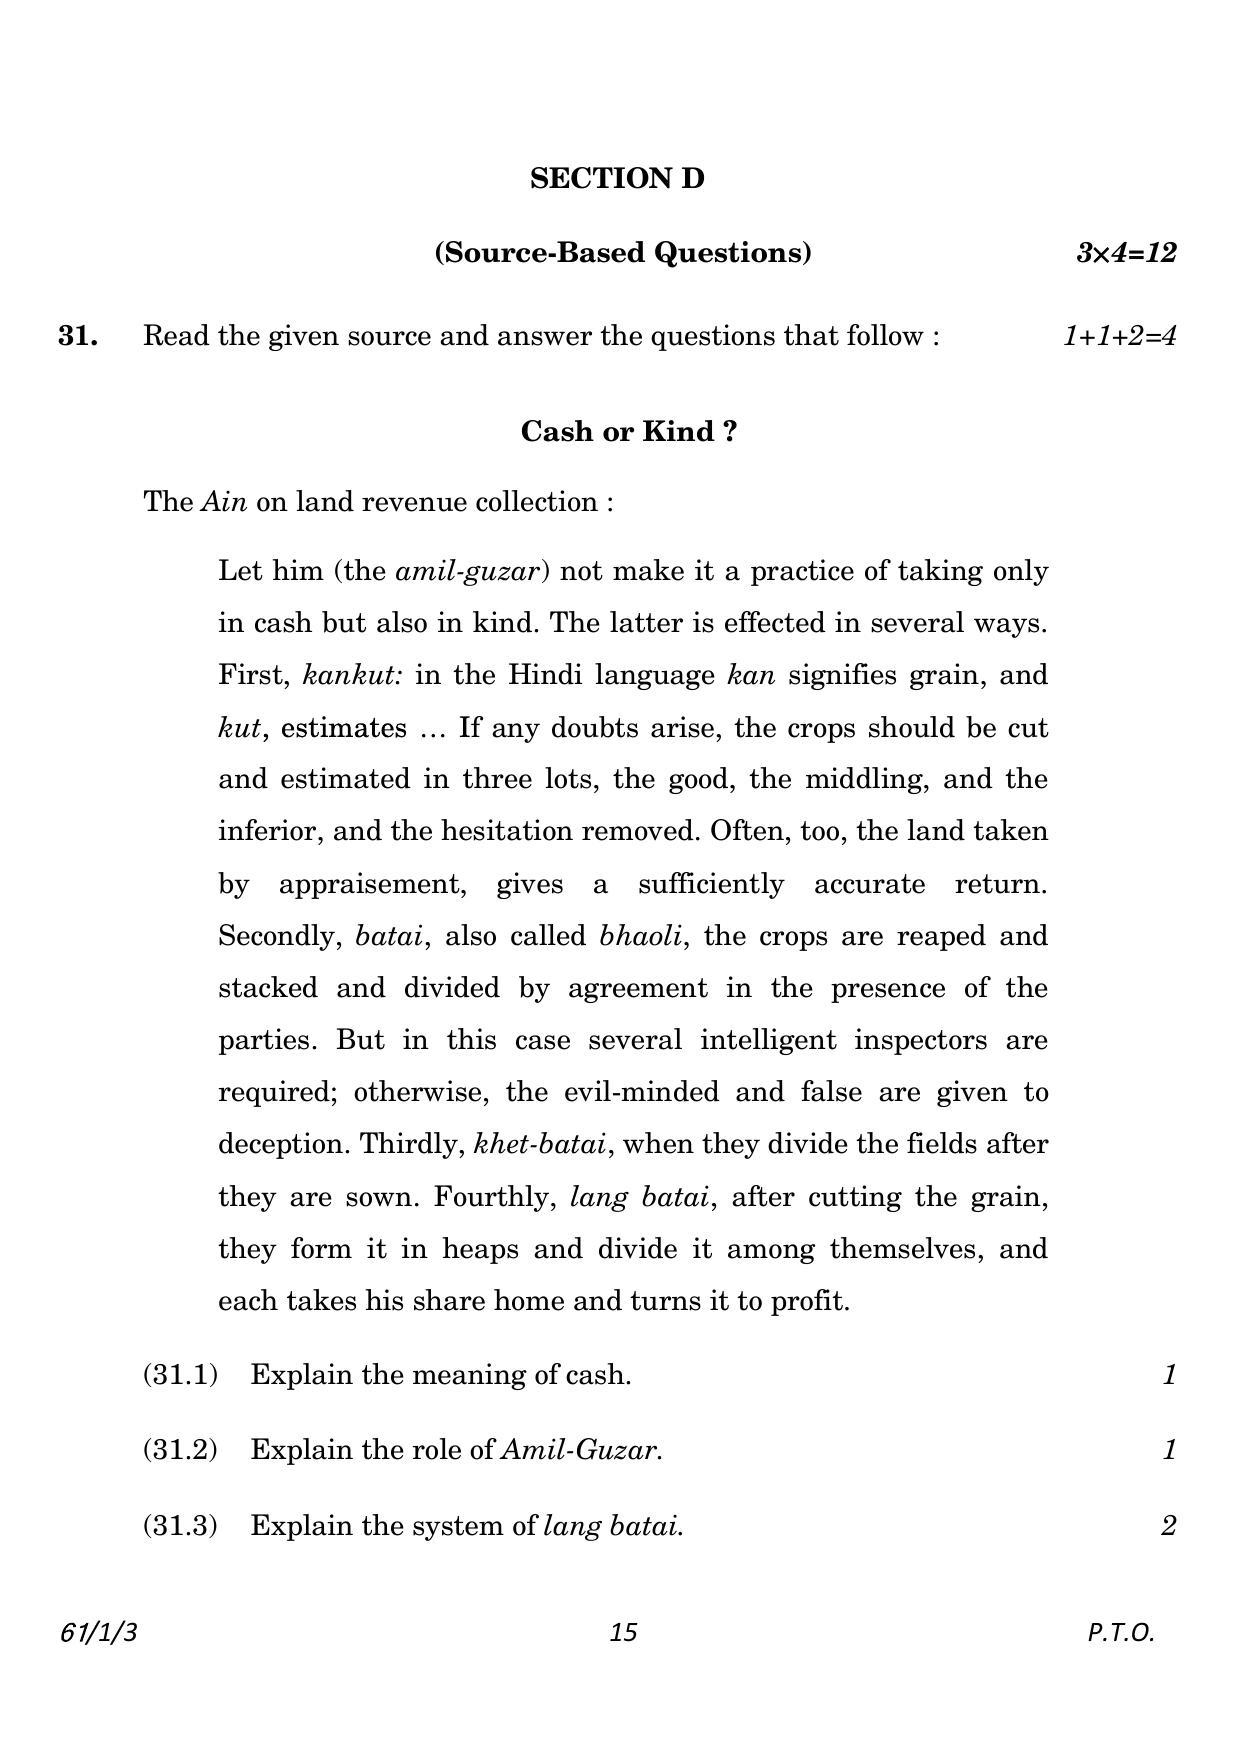 CBSE Class 12 61-1-3 History 2023 Question Paper - Page 15